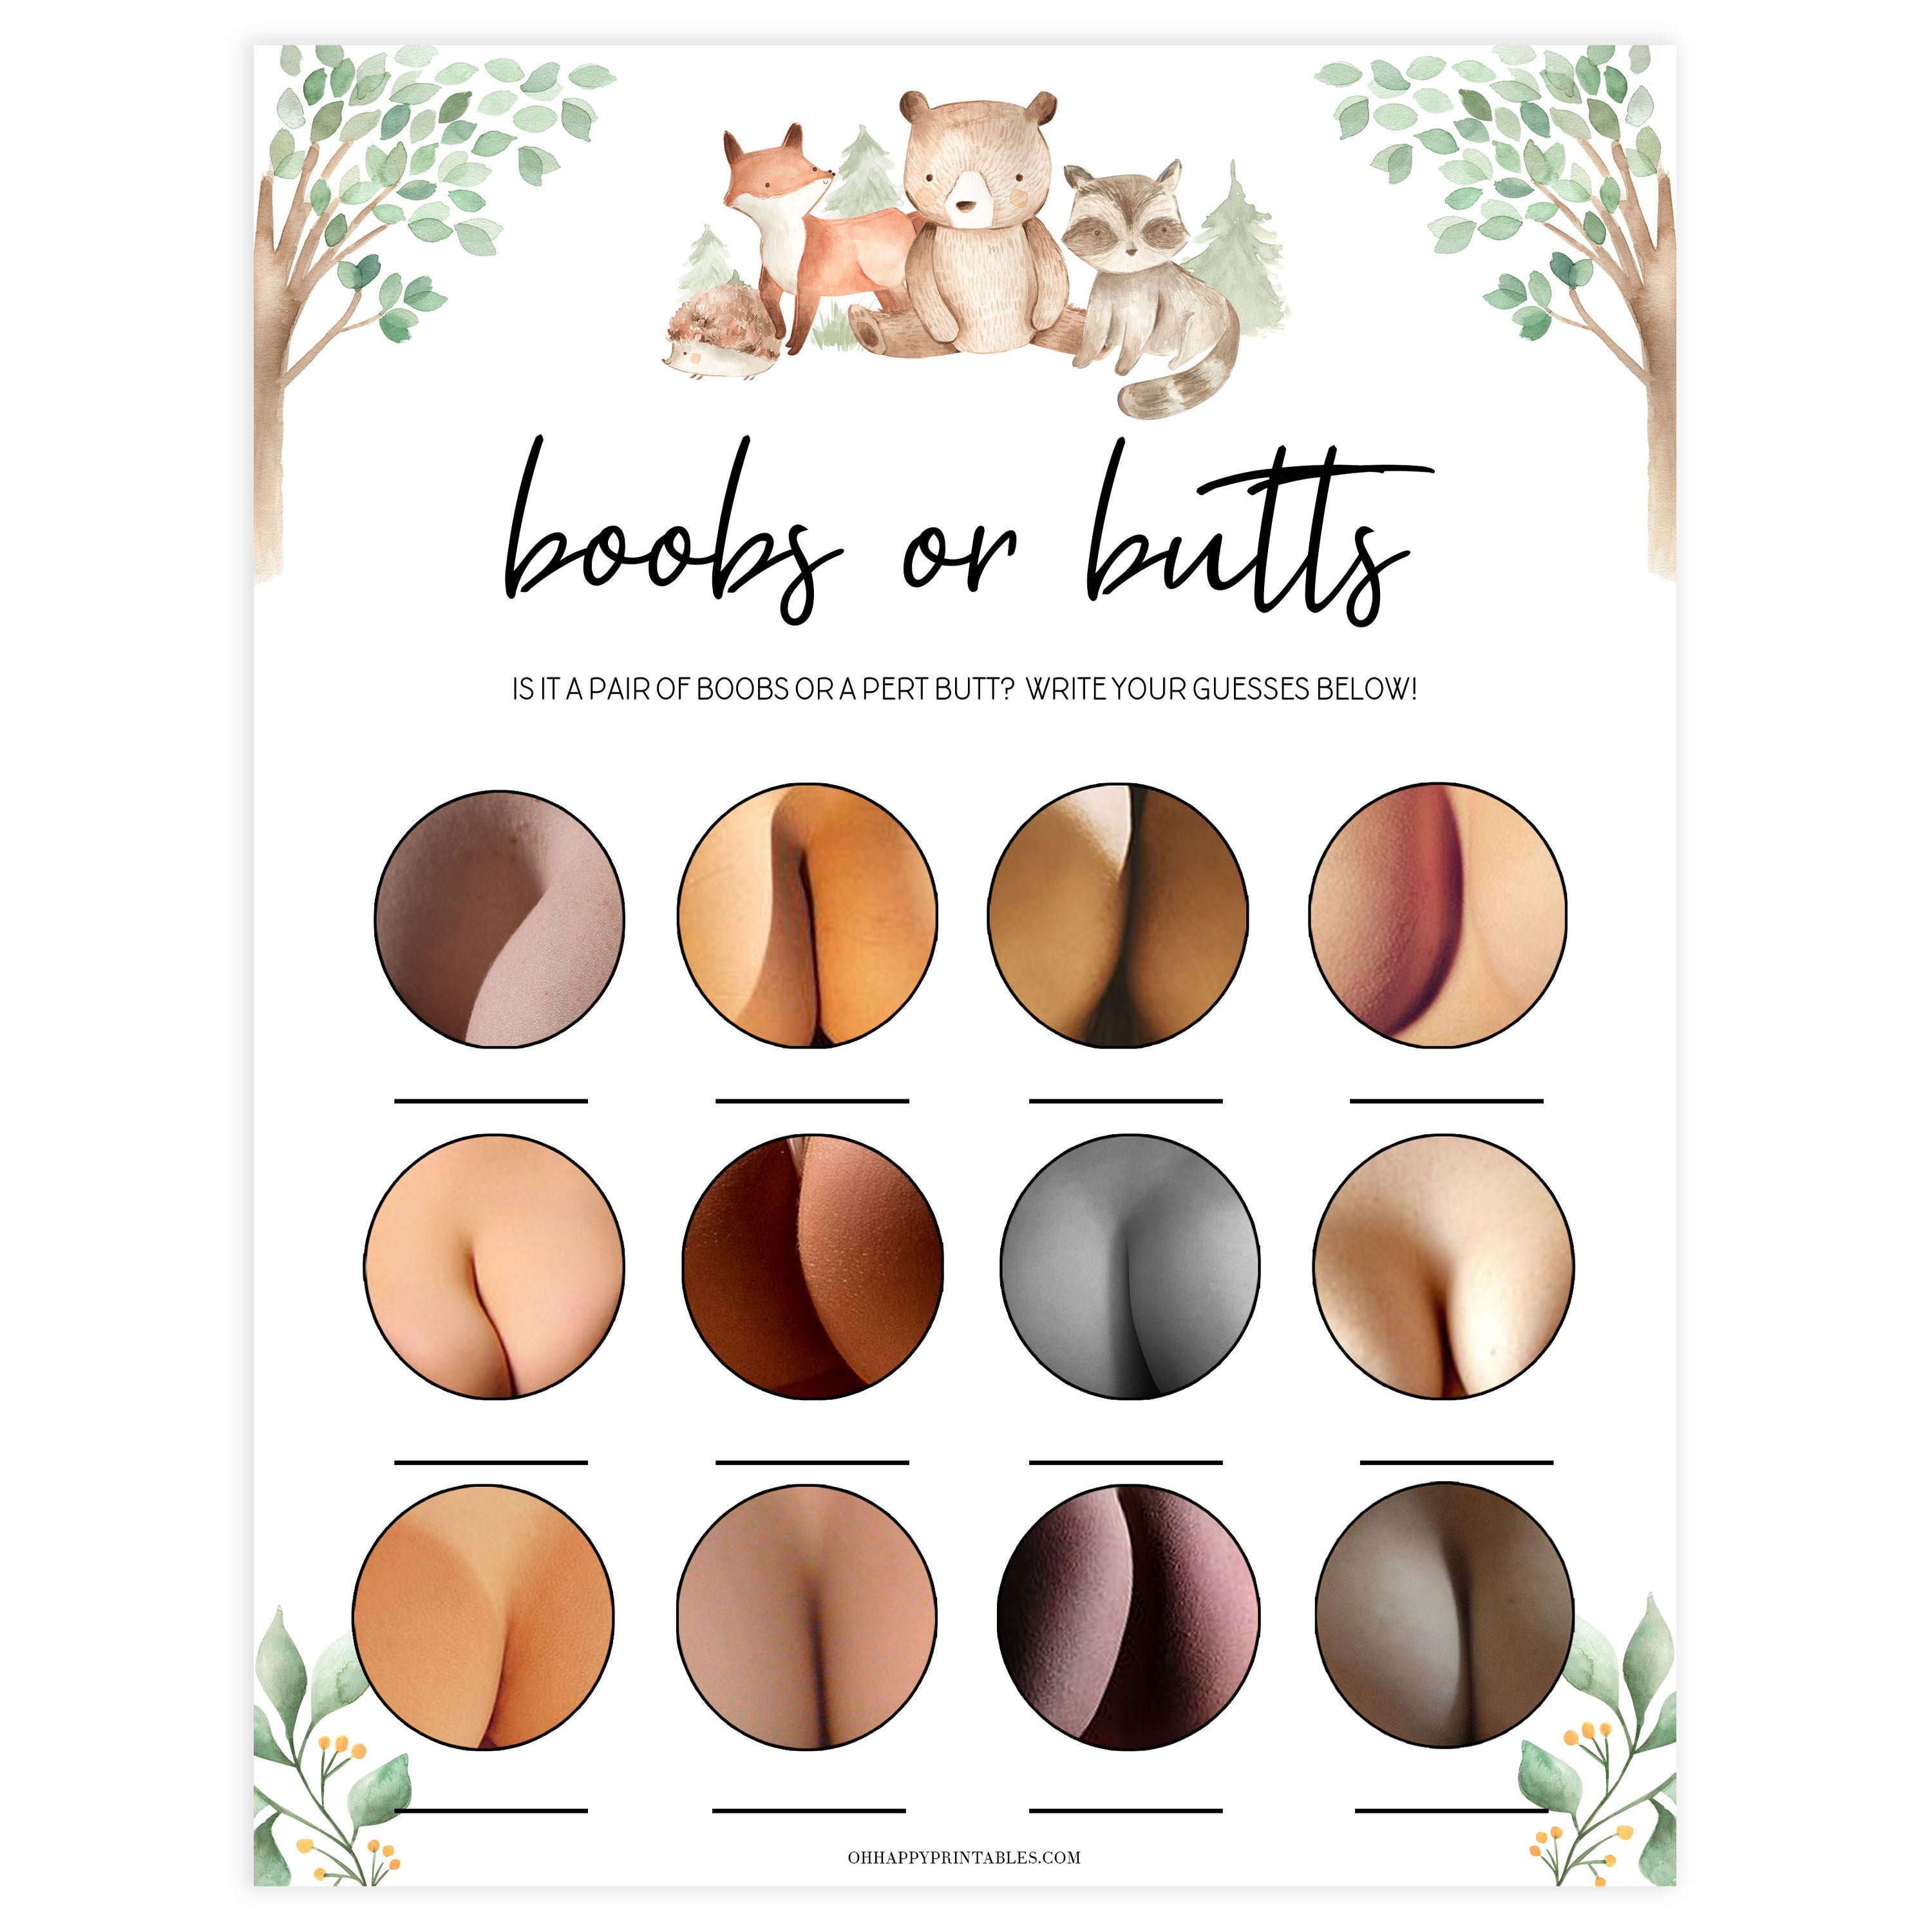 boobs or butts baby game, Printable baby shower games, woodland animals baby games, baby shower games, fun baby shower ideas, top baby shower ideas, woodland baby shower, baby shower games, fun woodland animals baby shower ideas